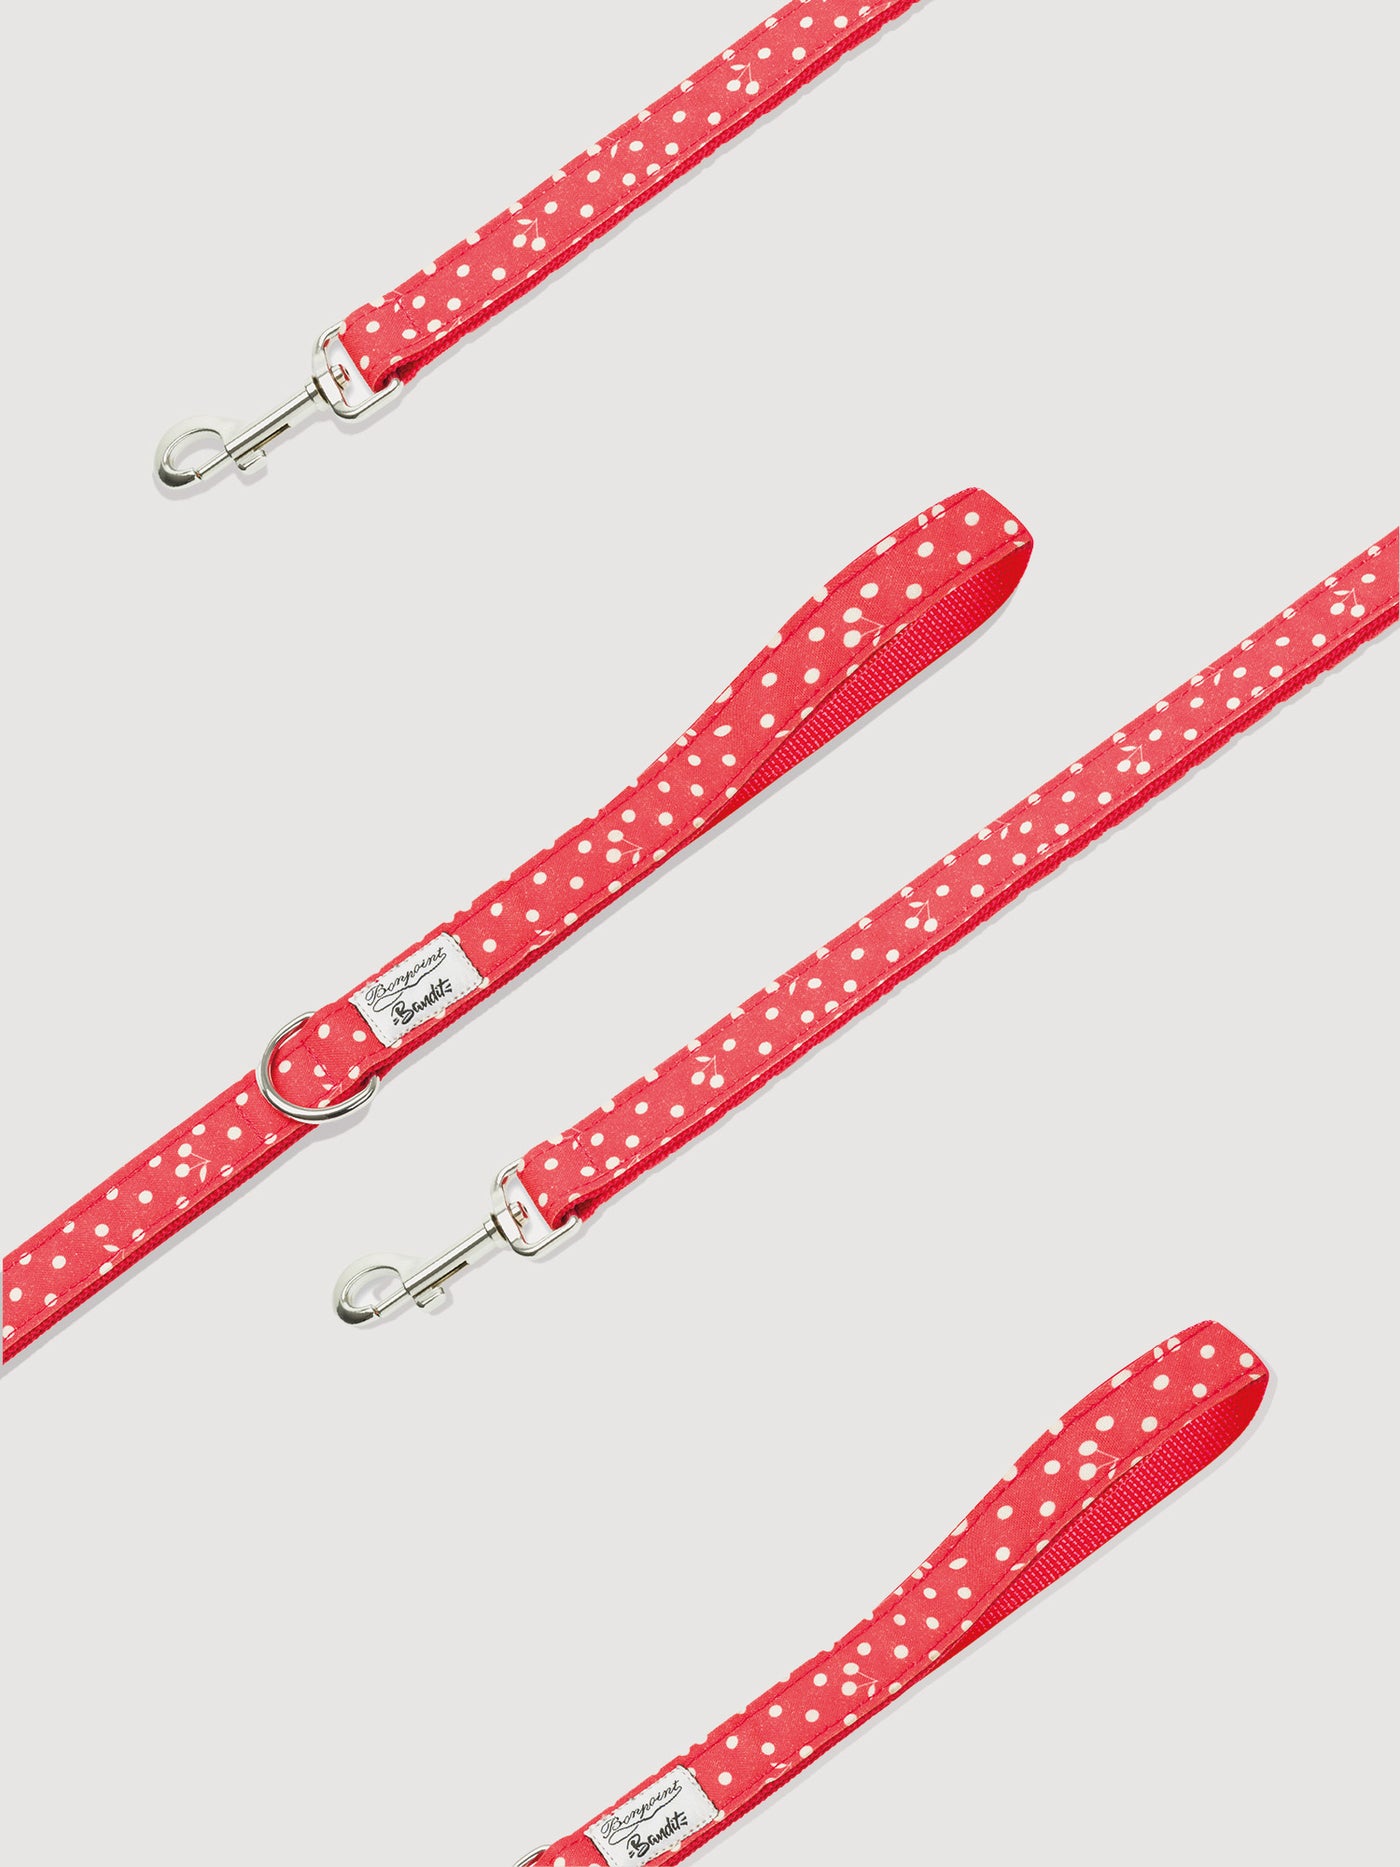 Bonpoint x Bandit Leash 47 1/4 in. red